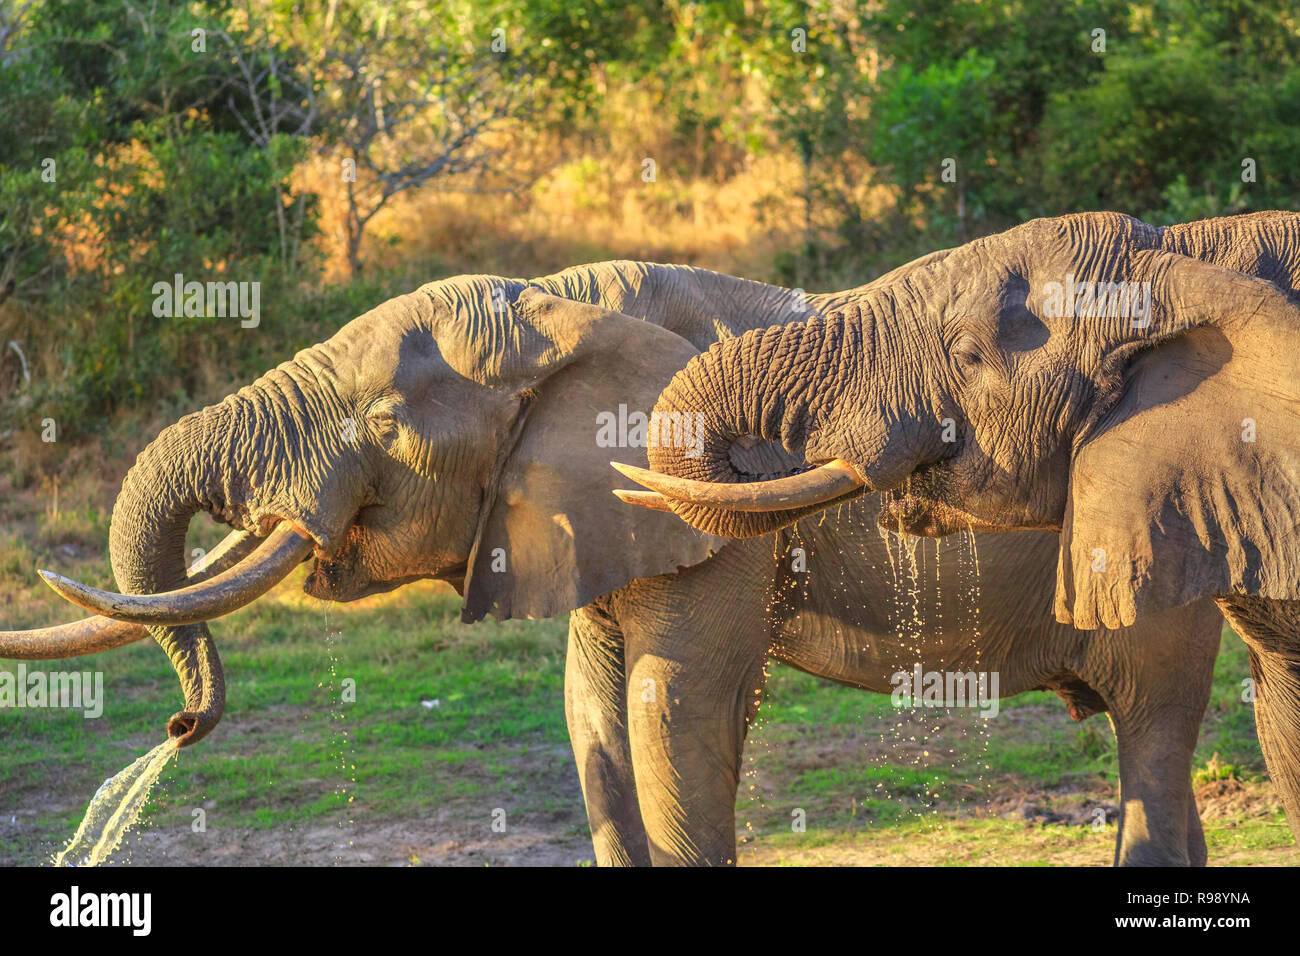 Closeup of two elephants drinking at a waterhole in Tembe Elephant Park, located in KwaZulu-Natal, South Africa, at the reserve between Zululand and Mozambique, home to Africa's largest elephants. Stock Photo